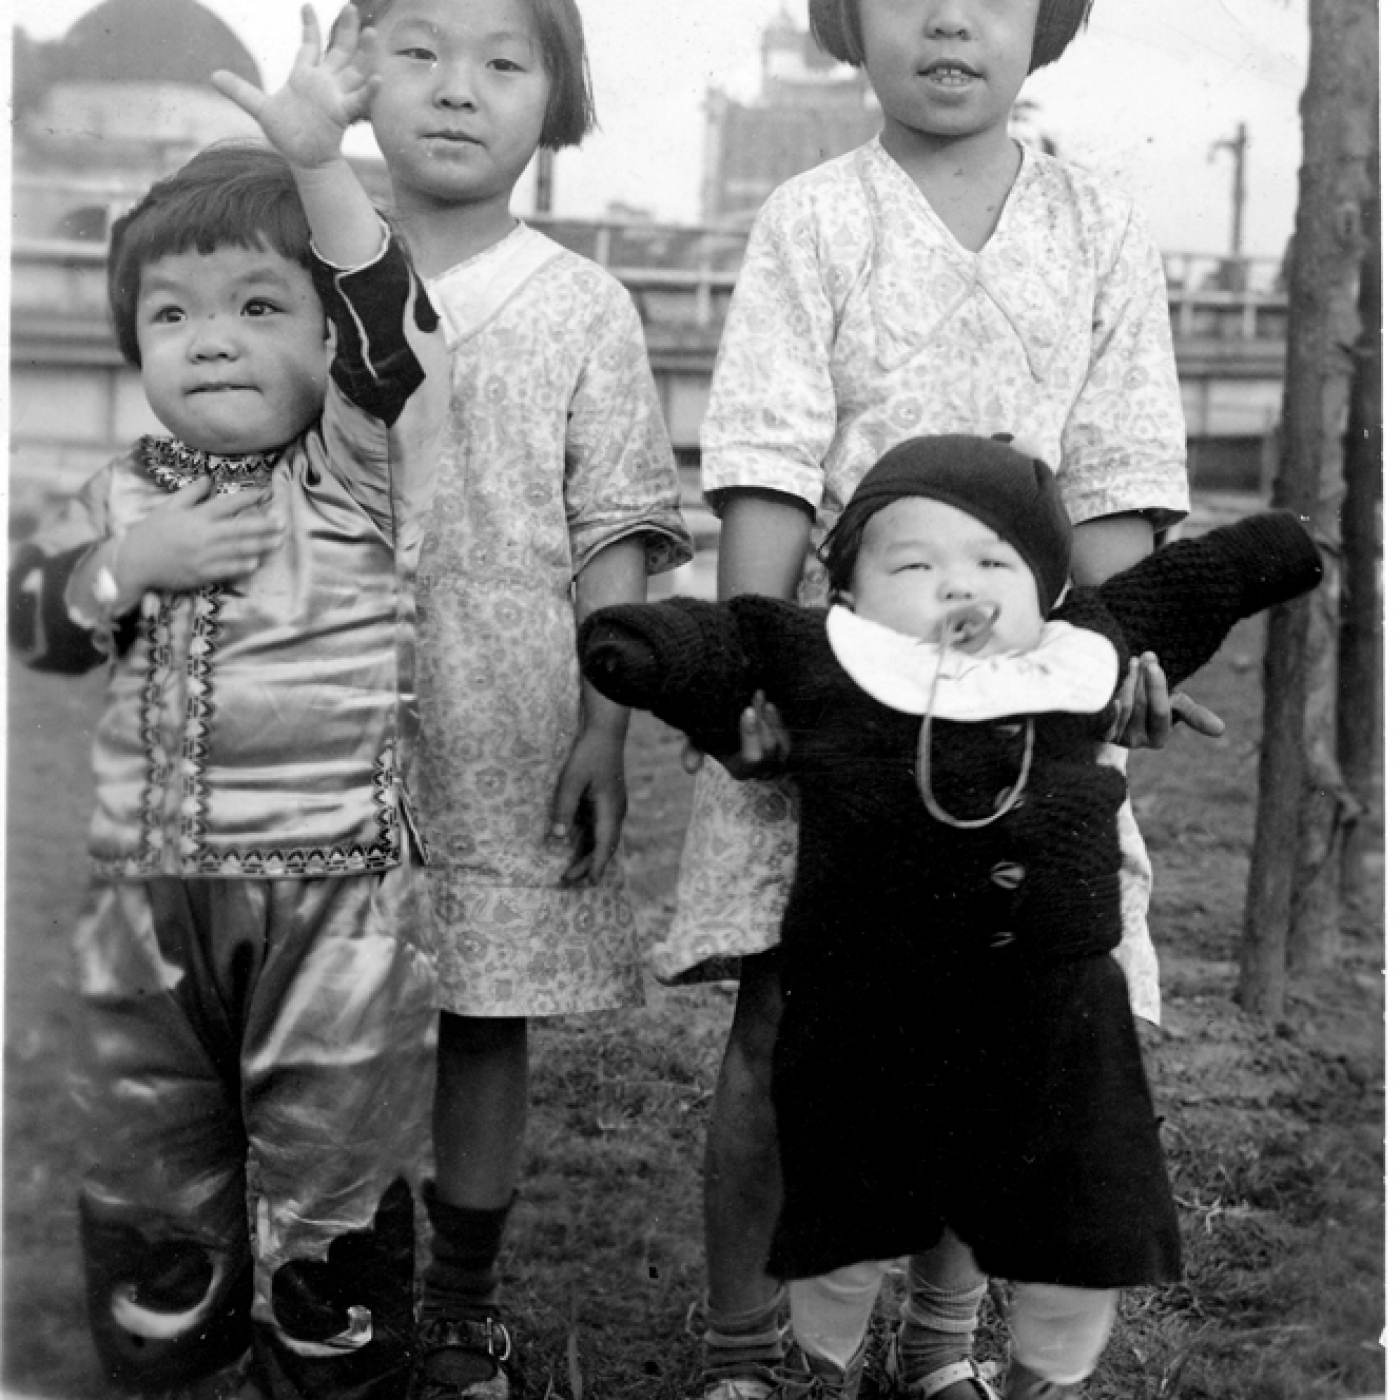 2004.080.006 Fannie (right) is holding her younger sister, Alice, and standing next to her sister Effie, who is also holding onto another child. The year is 1938. They are in Police Athletic League Park, which was torn down during the building of the Confucius Plaza apartment buildings. Courtesy of Fannie Lui, Museum of Chinese in America (MOCA) Collection. Fannie（右）抱着她的妹妹Alice，站在她的妹妹Effie 旁边，Effie 也抱着另一个孩子。这一年是1938年，他们在警察田联公园内，该公园在孔子大厦公寓楼的建设中被拆除。由Fannie Lui 捐赠，美国华人博物馆 (MOCA) 馆藏。